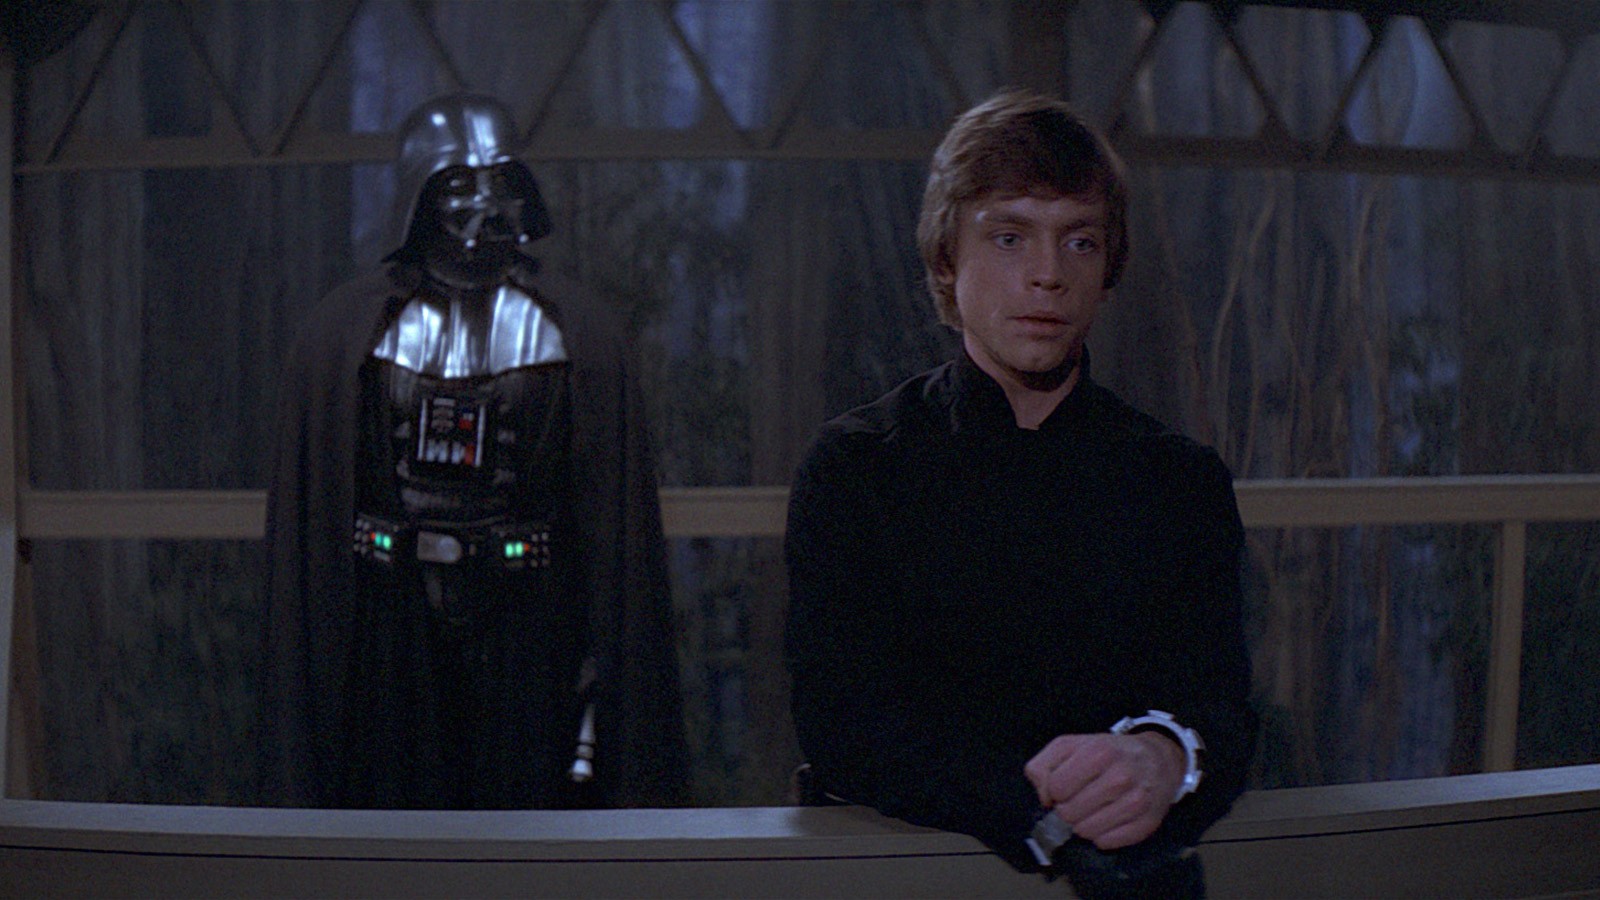 Luke Skywalker and Darth Vader interacting in a still from Star Wars: Return of the Jedi